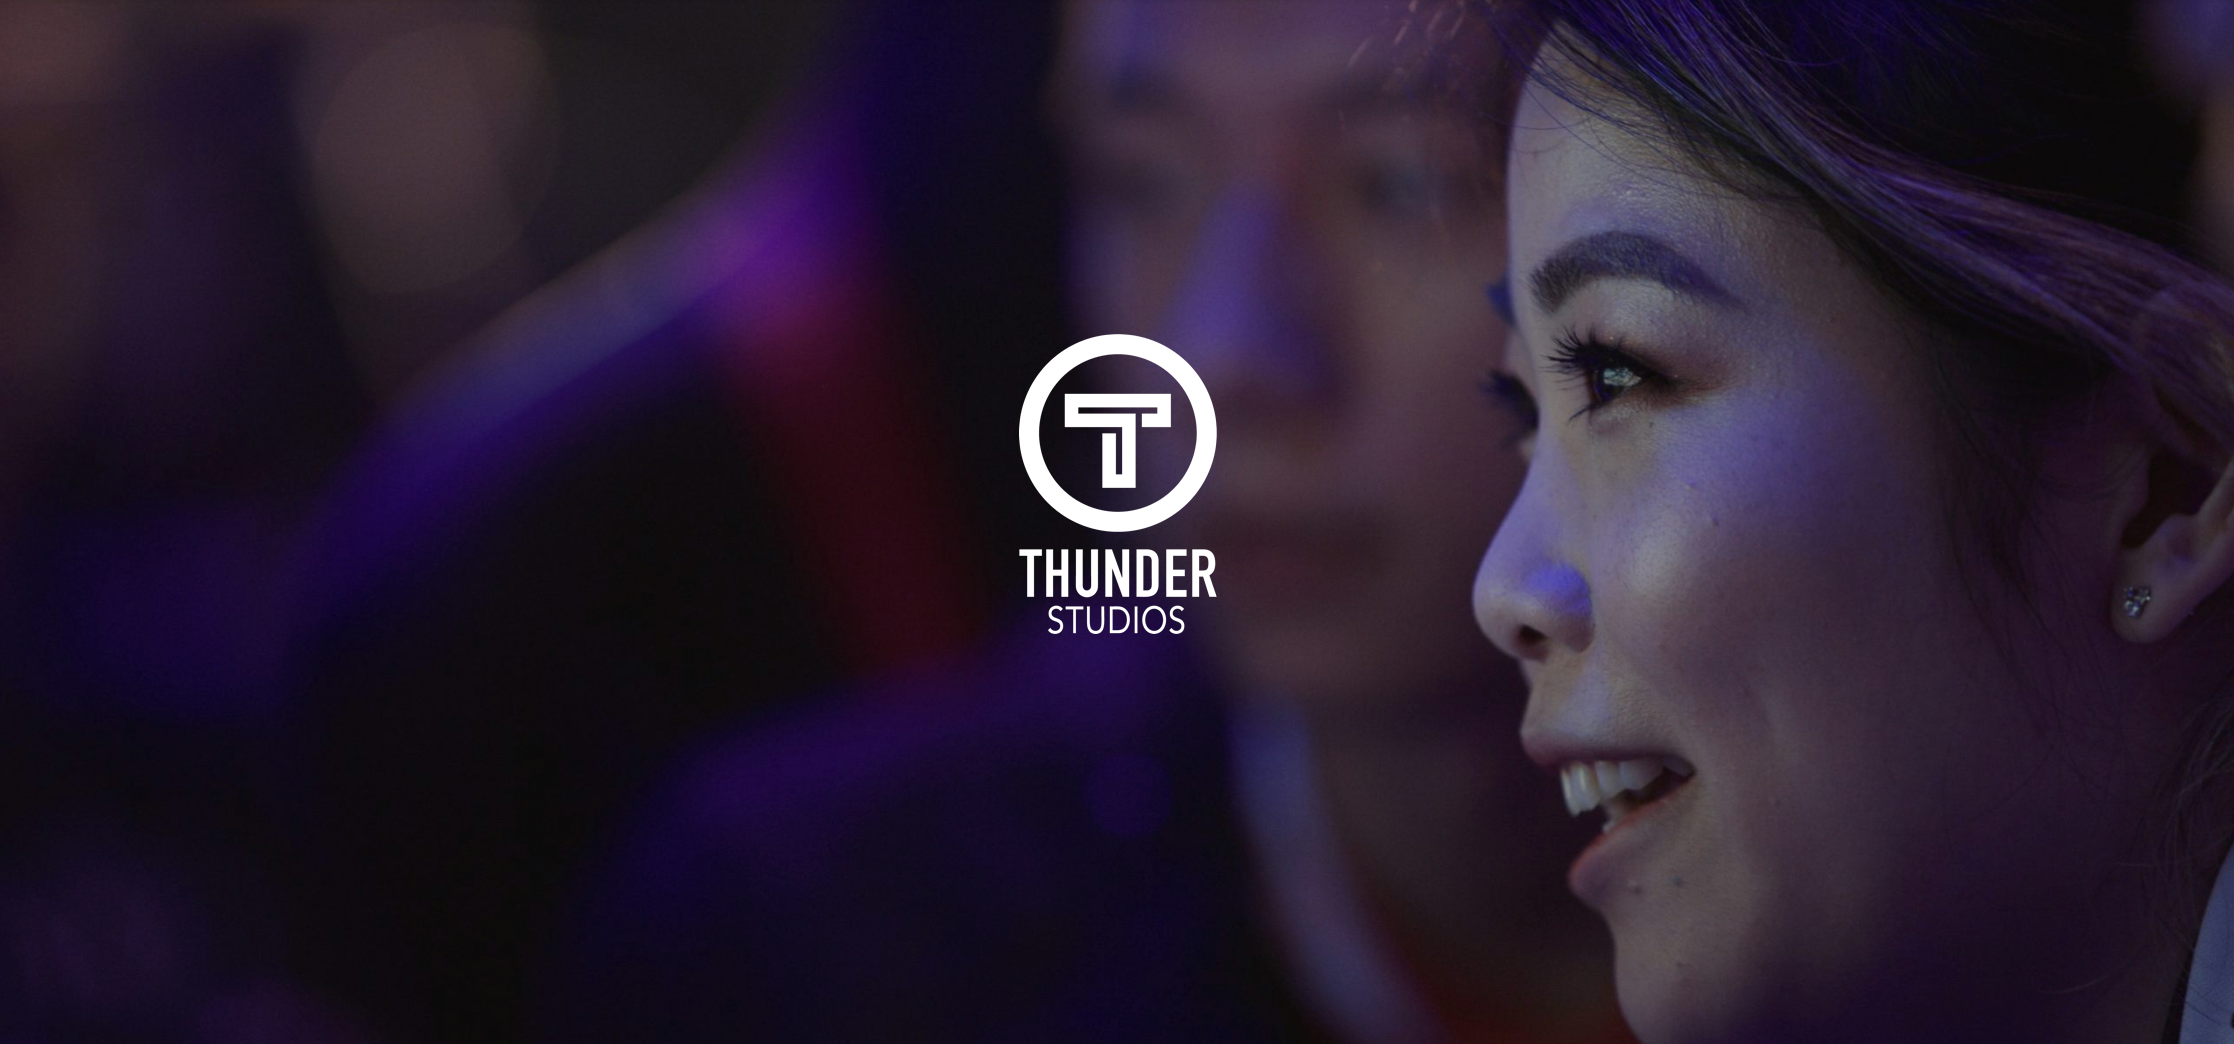 White Thunder Studios logo with oriental woman in background